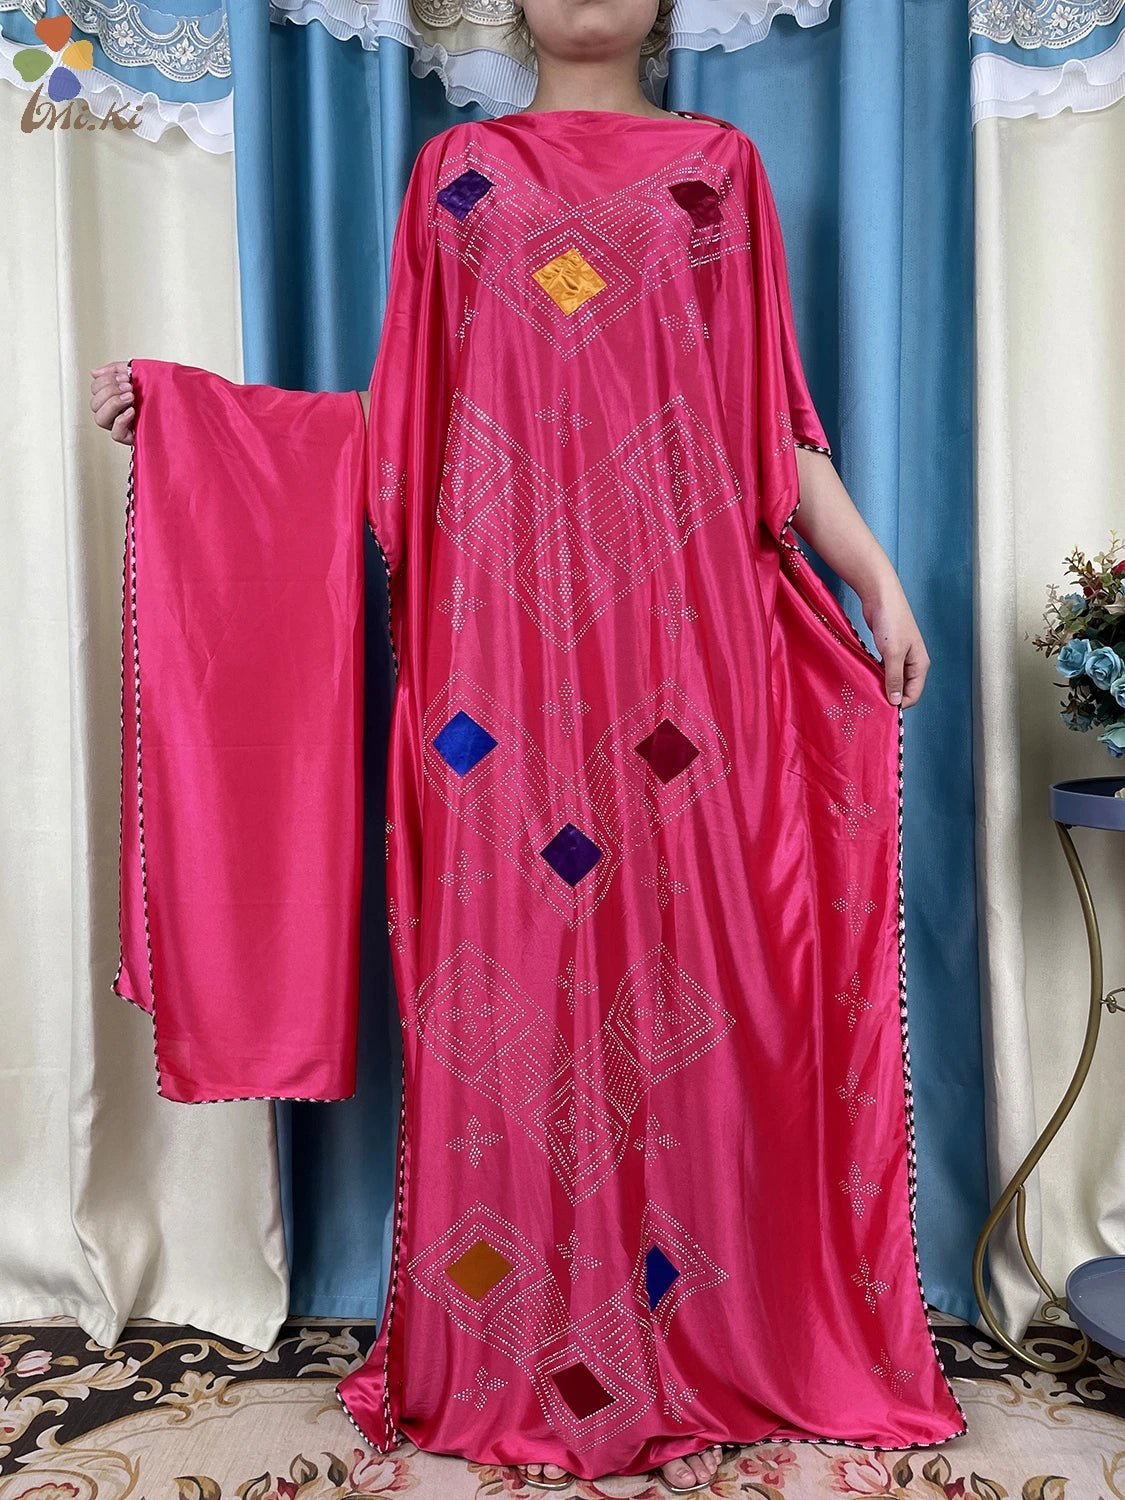 Muslim Prayer Clothing 2024 New African Abaya Women Clothing inlaid with Mubarak Dubai luxury clothing Islamic Clothing - Flexi Africa - Flexi Africa offers Free Delivery Worldwide - Vibrant African traditional clothing showcasing bold prints and intricate designs